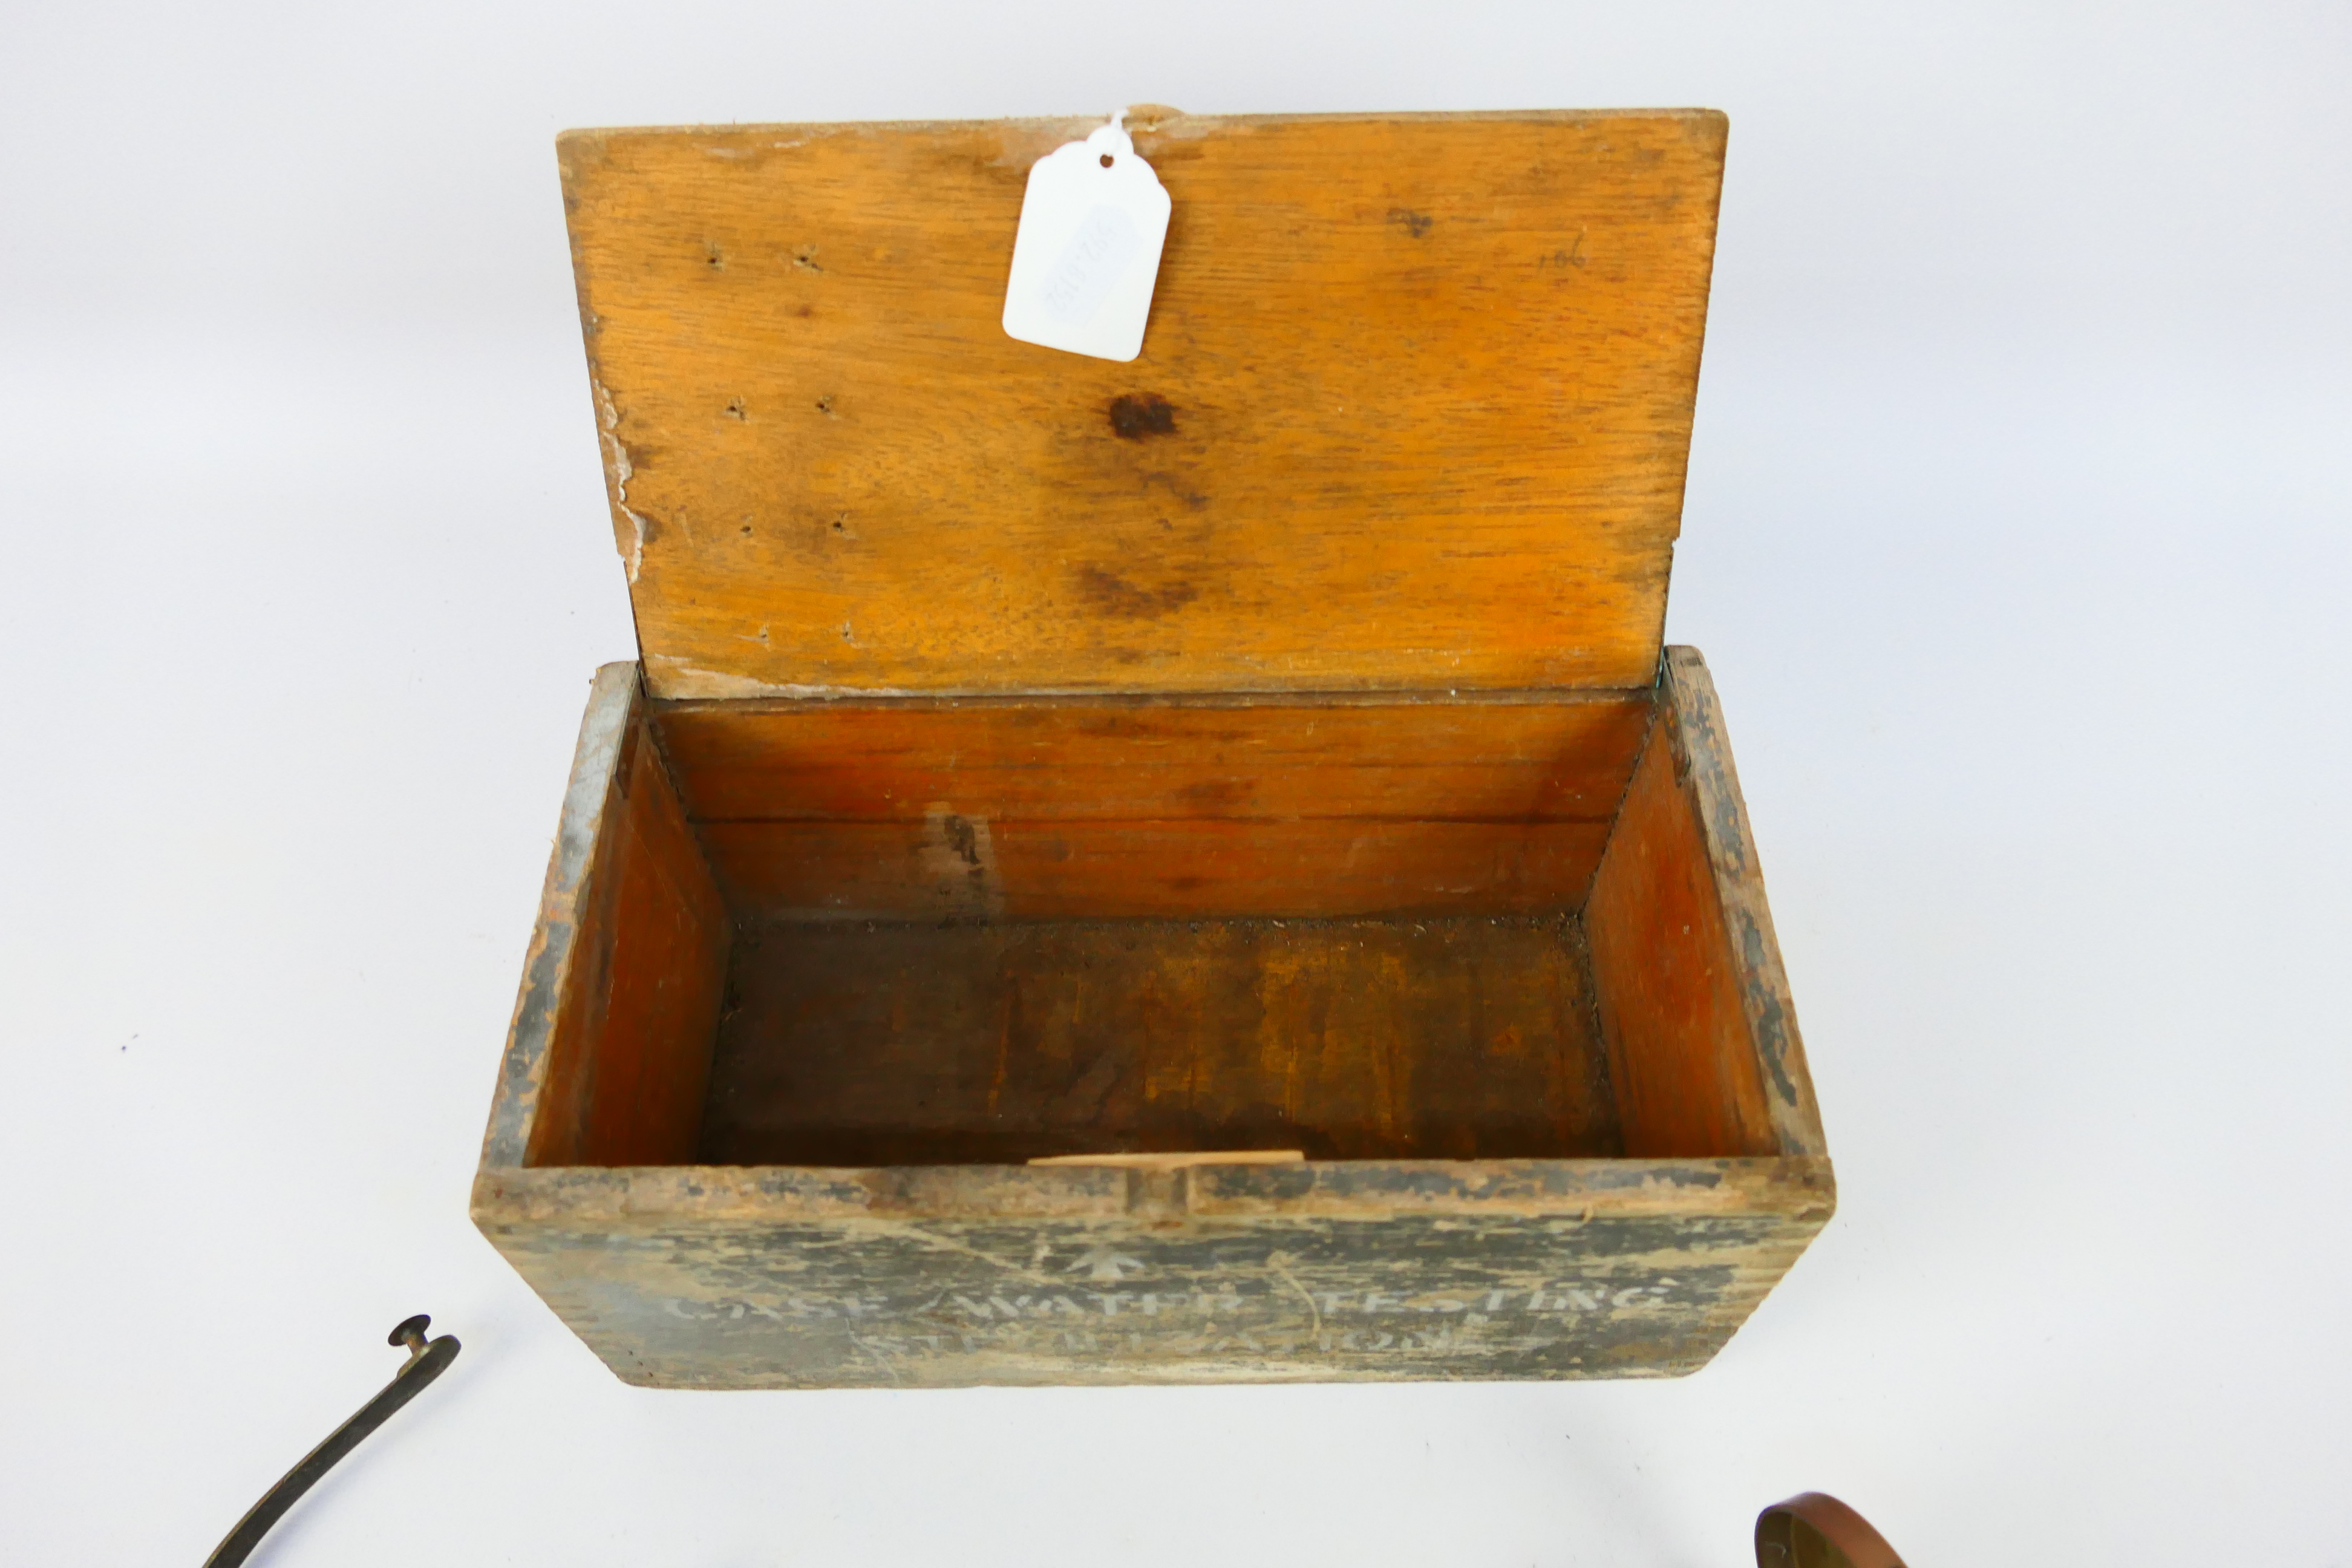 Lot to include a World War Two (WW2 / WWII) Case Water Testing Sterilization wooden box, - Image 3 of 7